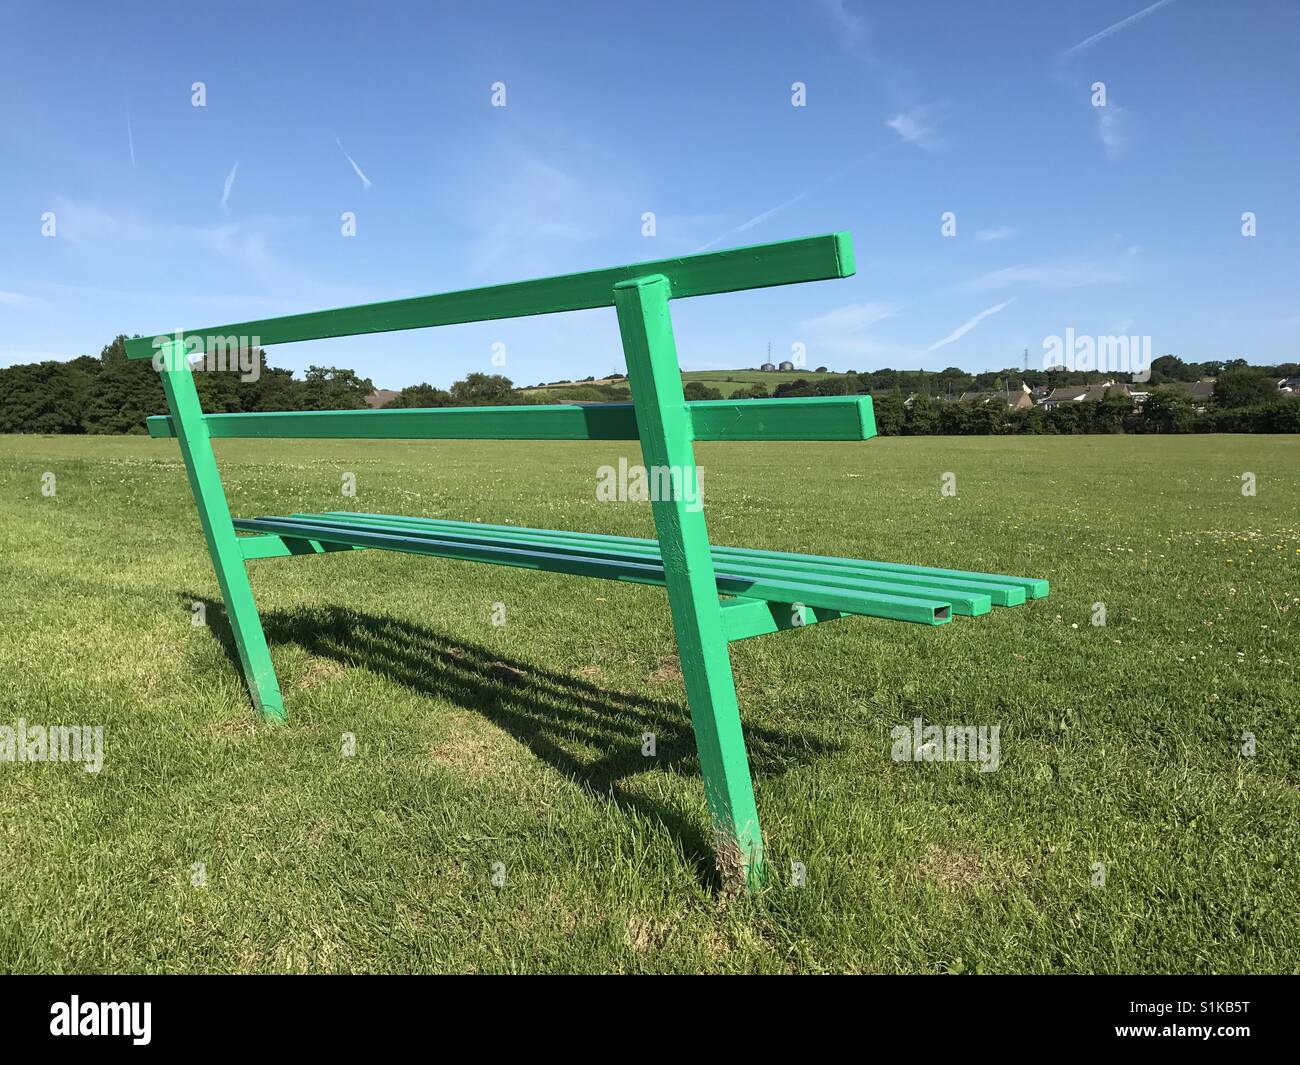 Empty green bench in a public park with a cricket pitch (landscape format) Stock Photo